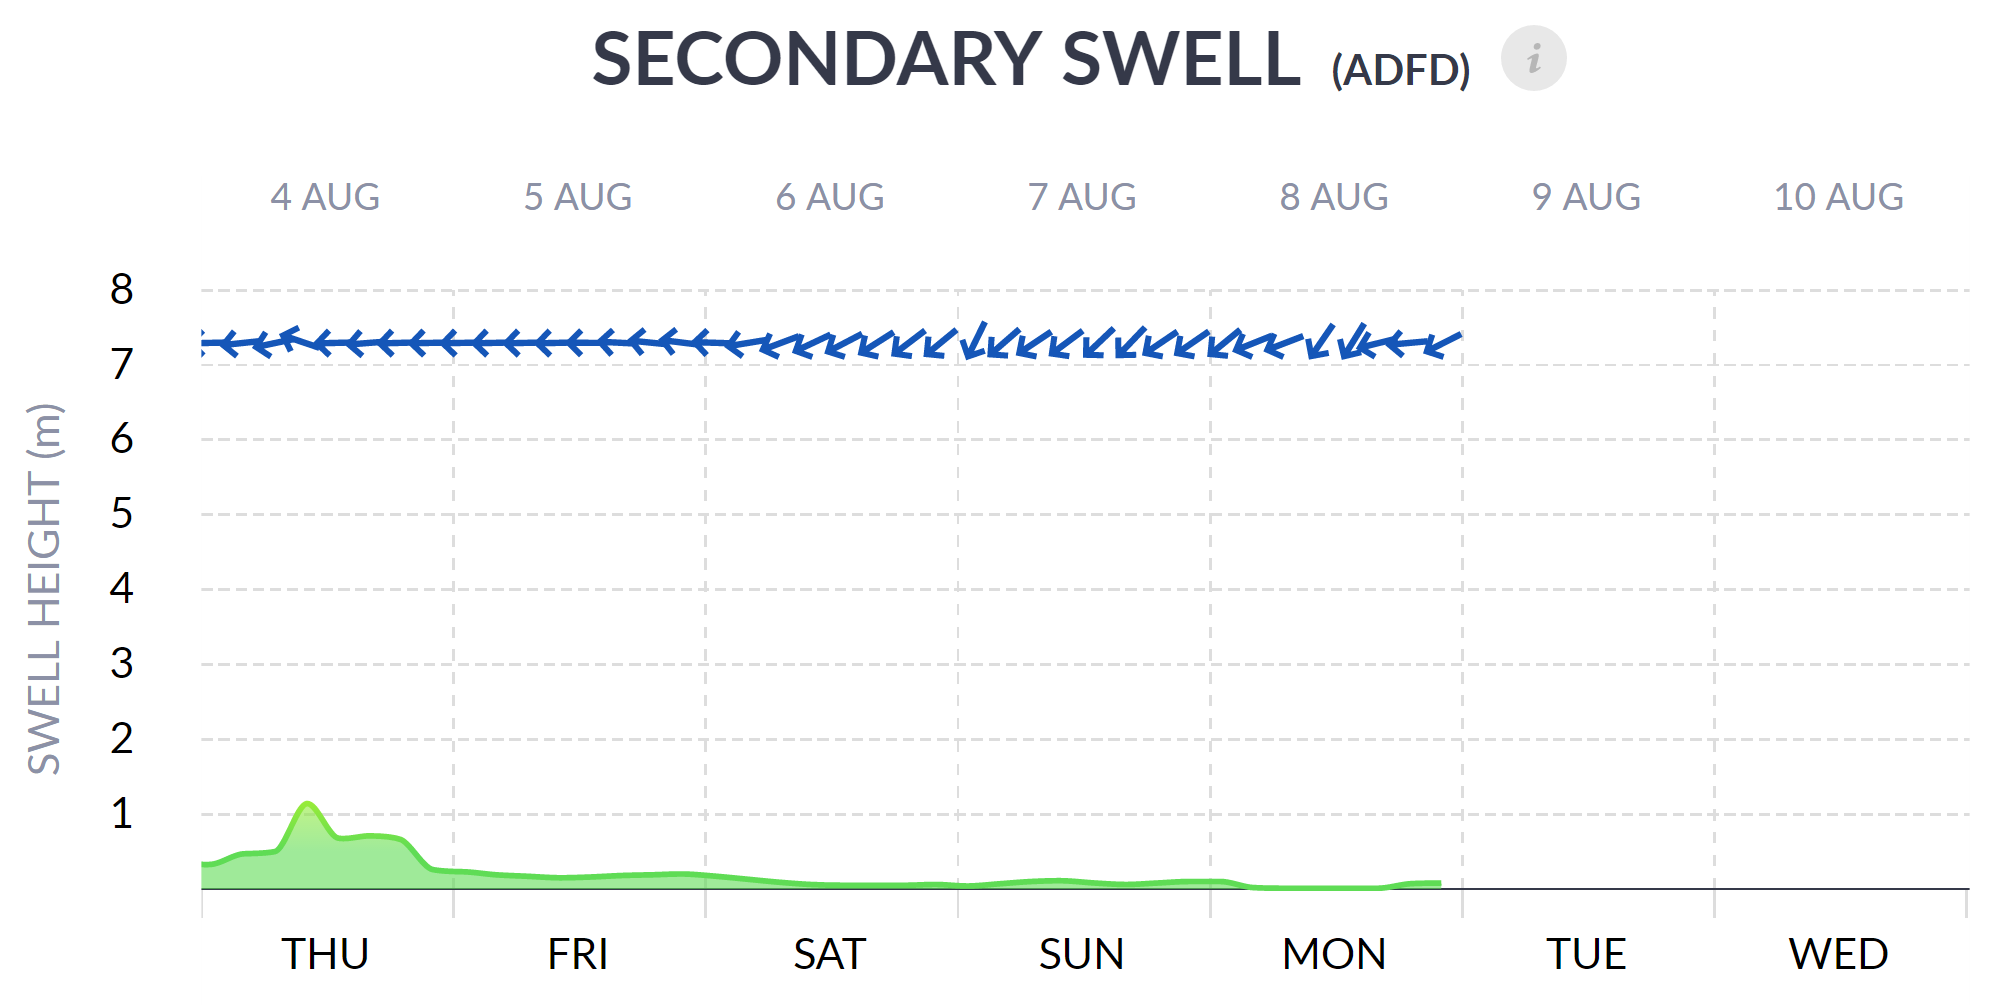 Secondary Swell